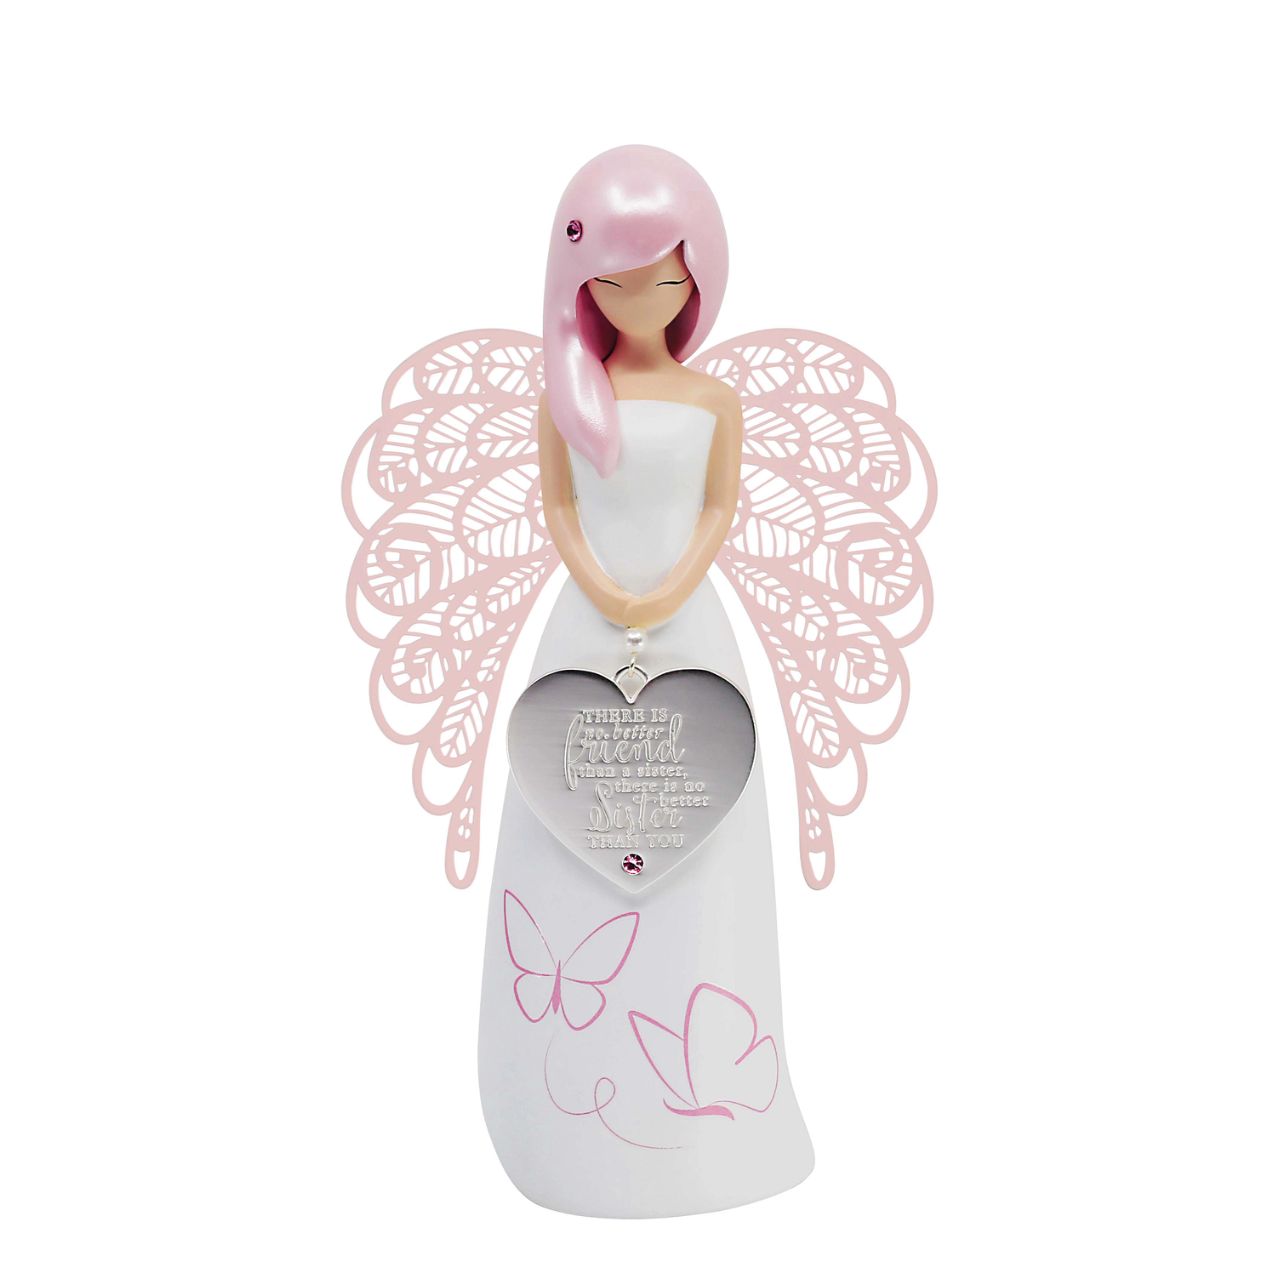 You Are An Angel Thank You Figurine  "There is no better friend than a sister, there is no better sister than you"  Looking for a thoughtful gift that's both beautiful and meaningful? These stunning angels are the perfect way to show someone special just how much they mean to you.